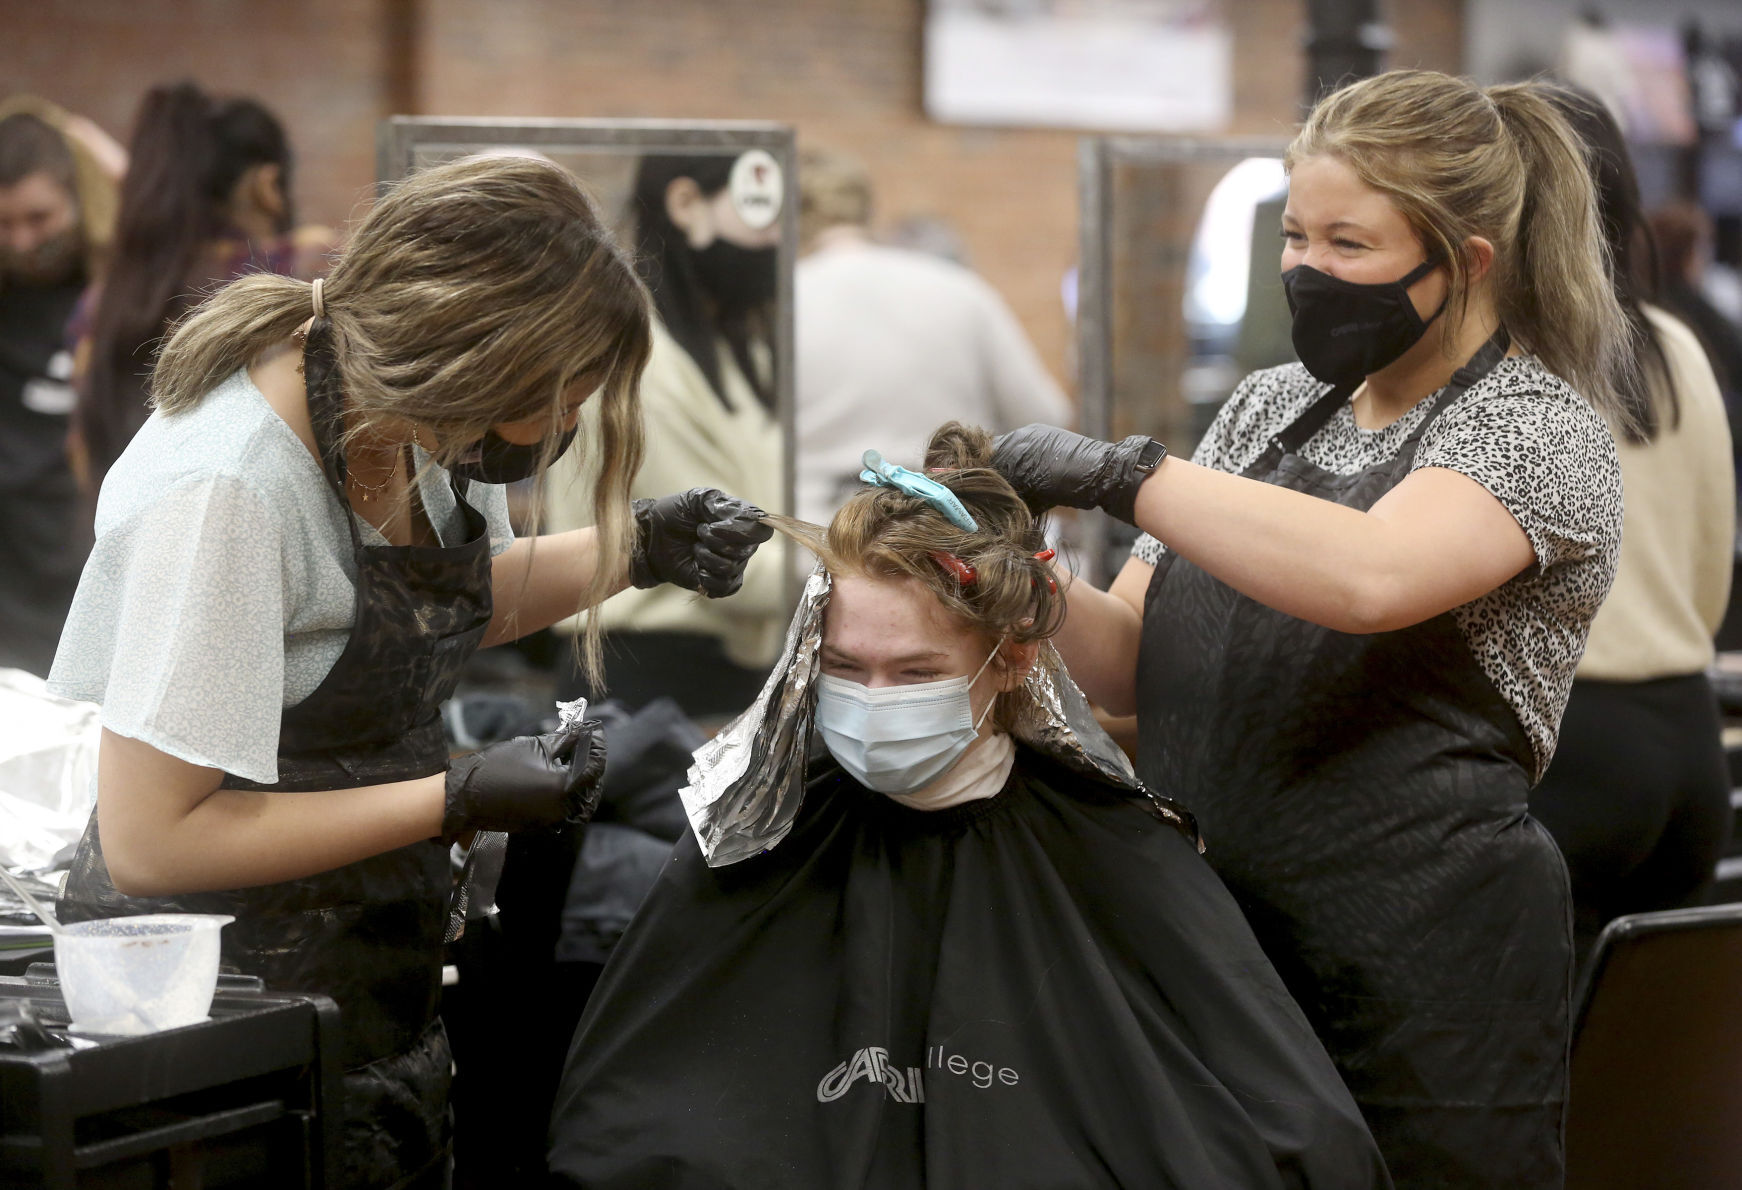 Capri College students Lexie Brandt (left) and Shelby Duehr apply a hair color to Dwight Lloyd, of Hanover, Ill., at Capri in Dubuque on Thursday. PHOTO CREDIT: JESSICA REILLY